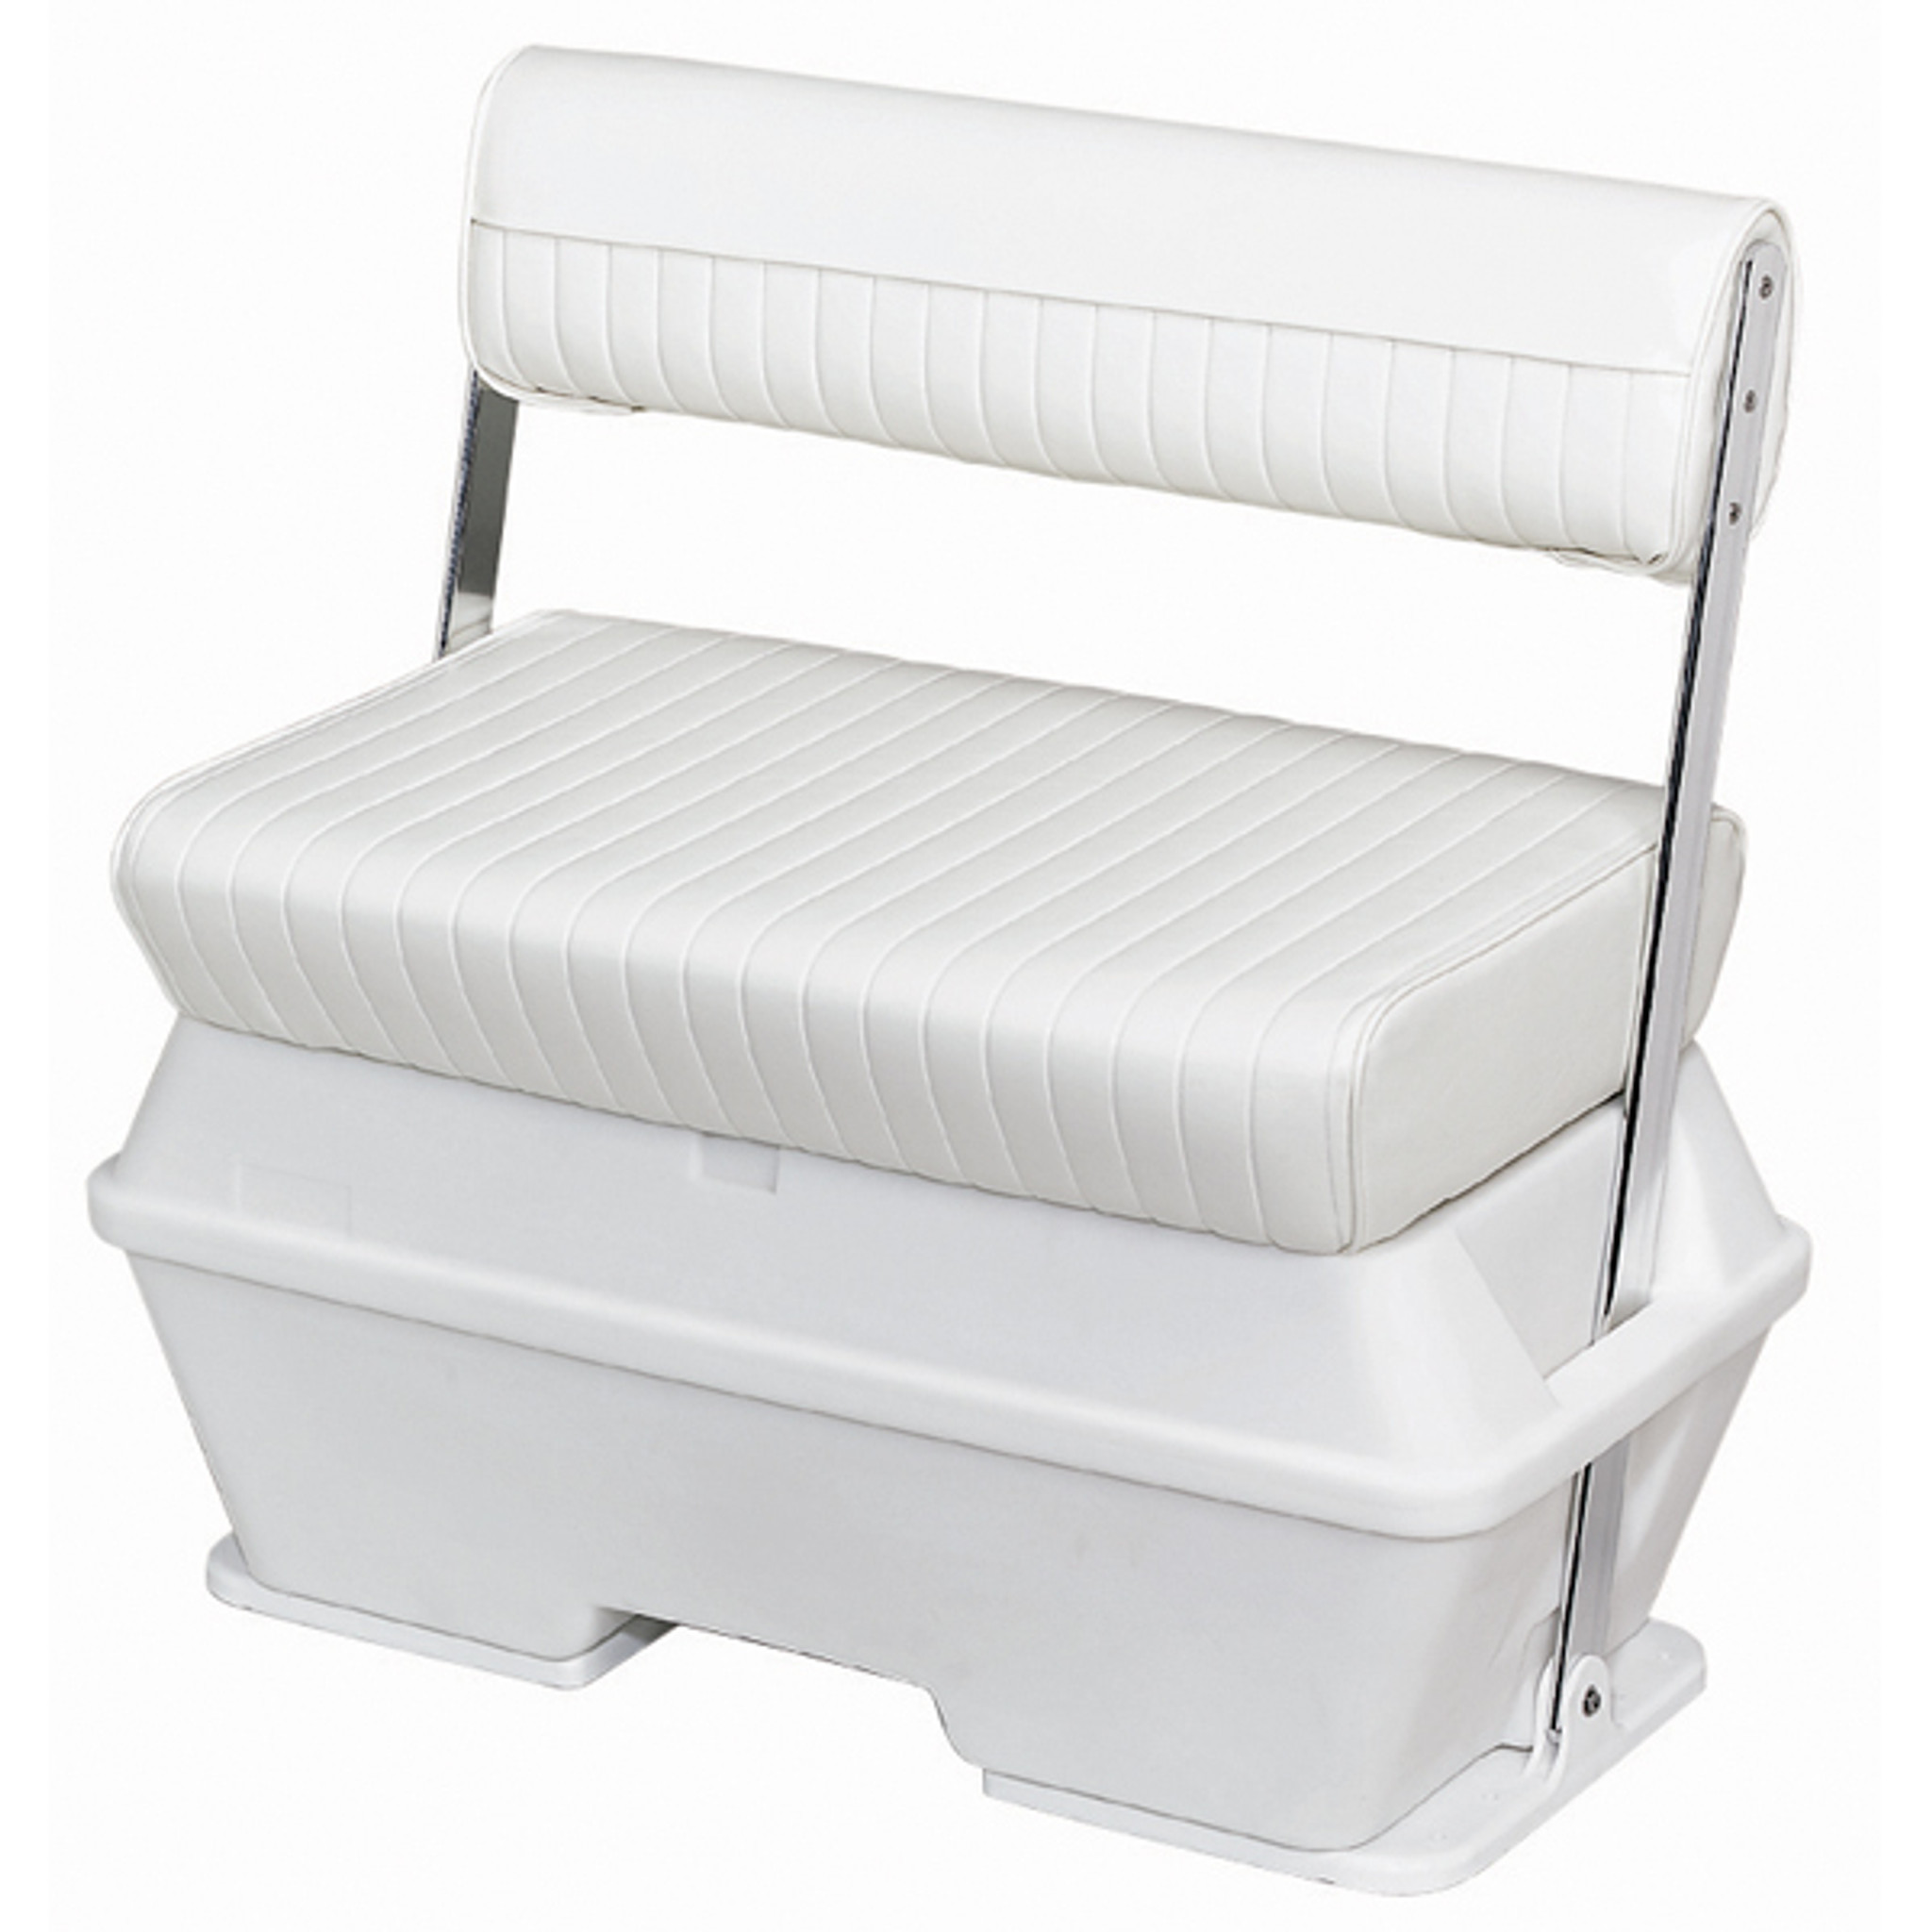 Wise 8WD159 R S Replacement Seat Cushion for Series Swingback Cooler White